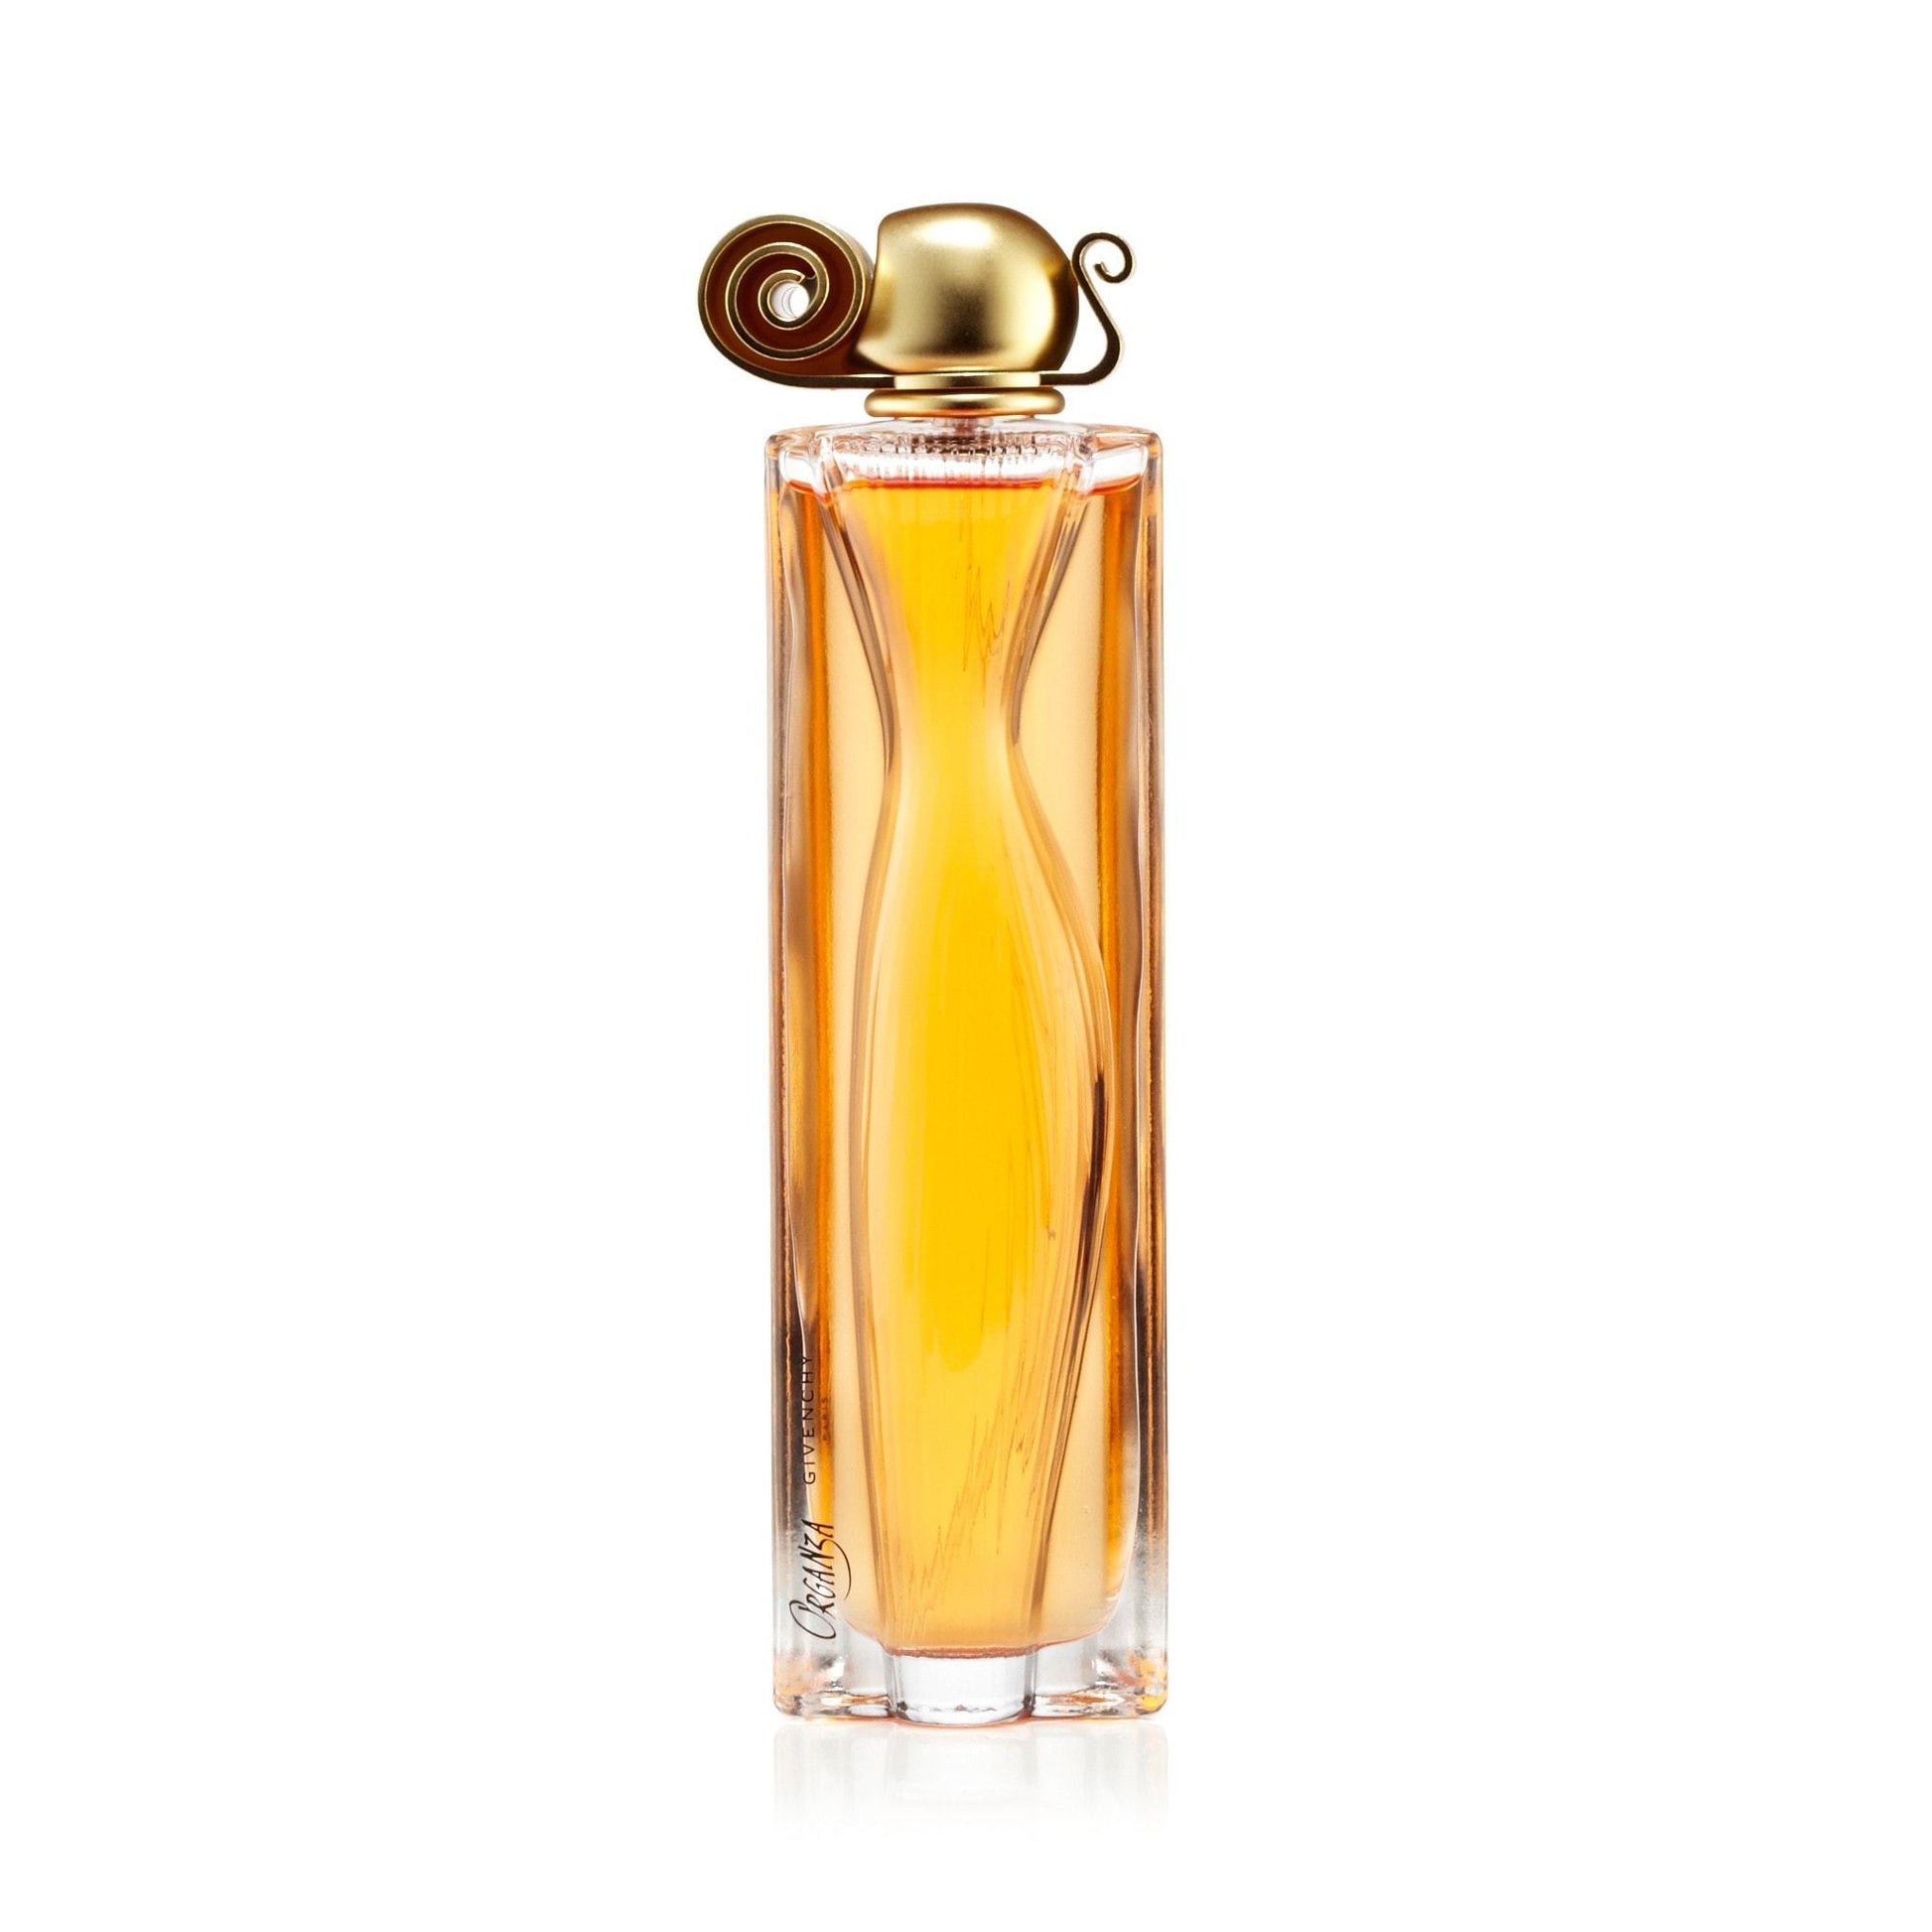 Organza Eau de Parfum Spray for Women by Givenchy, Product image 2